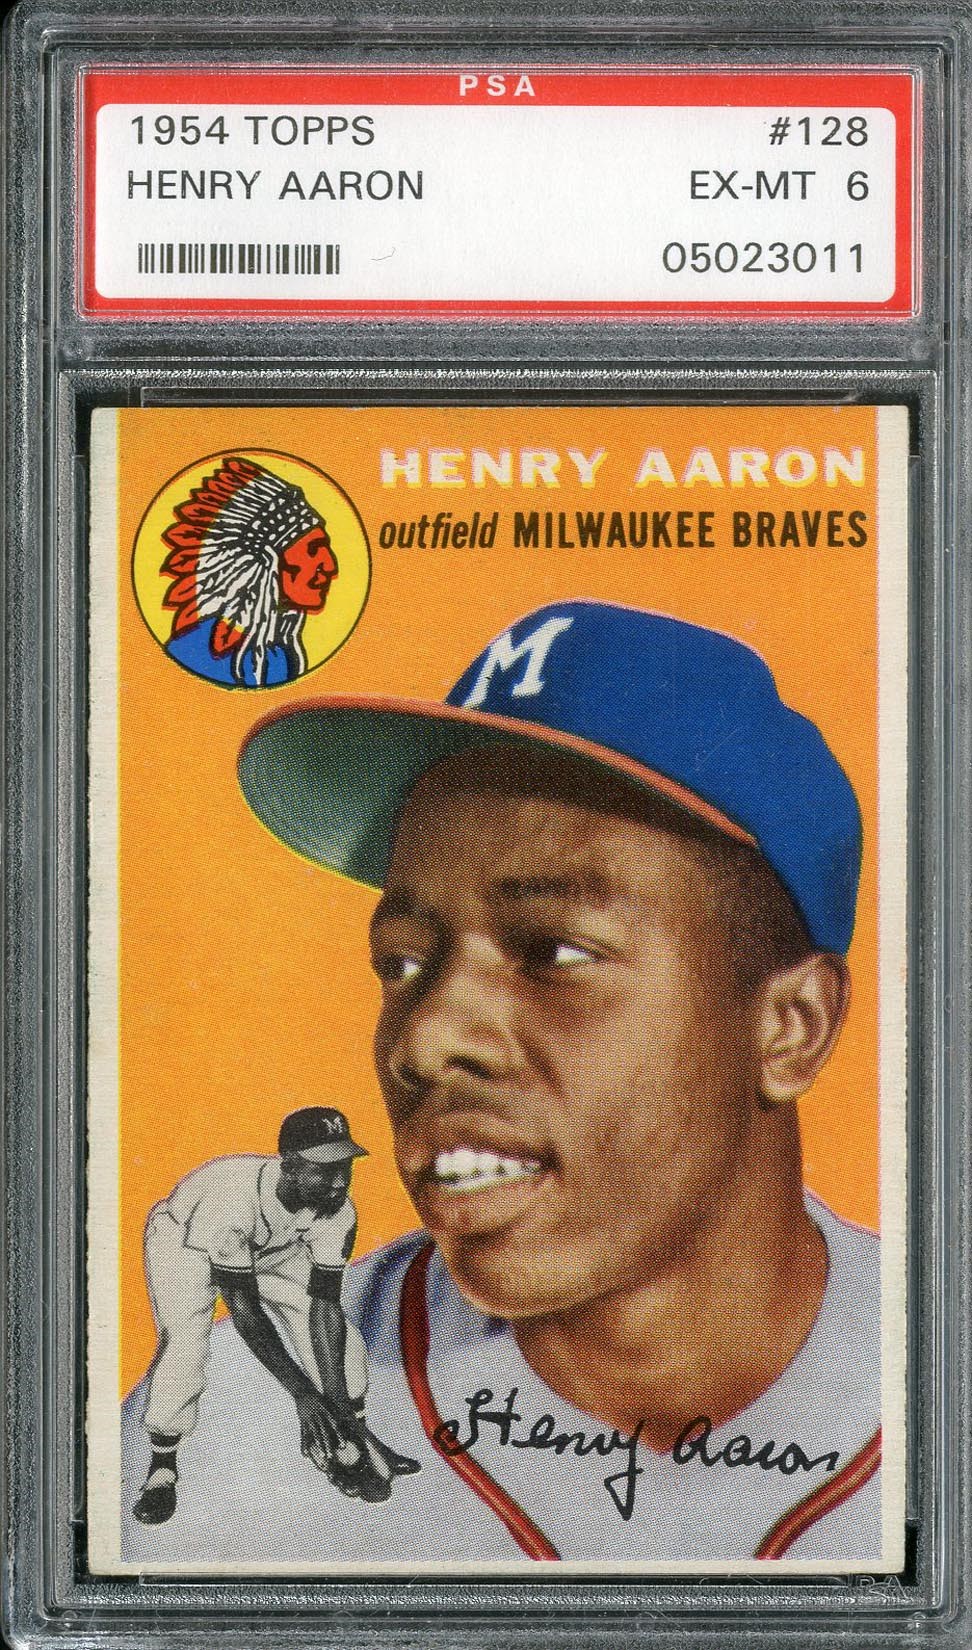 Baseball and Trading Cards - 1954 Topps Hank Aaron #128 PSA EX-MT 6